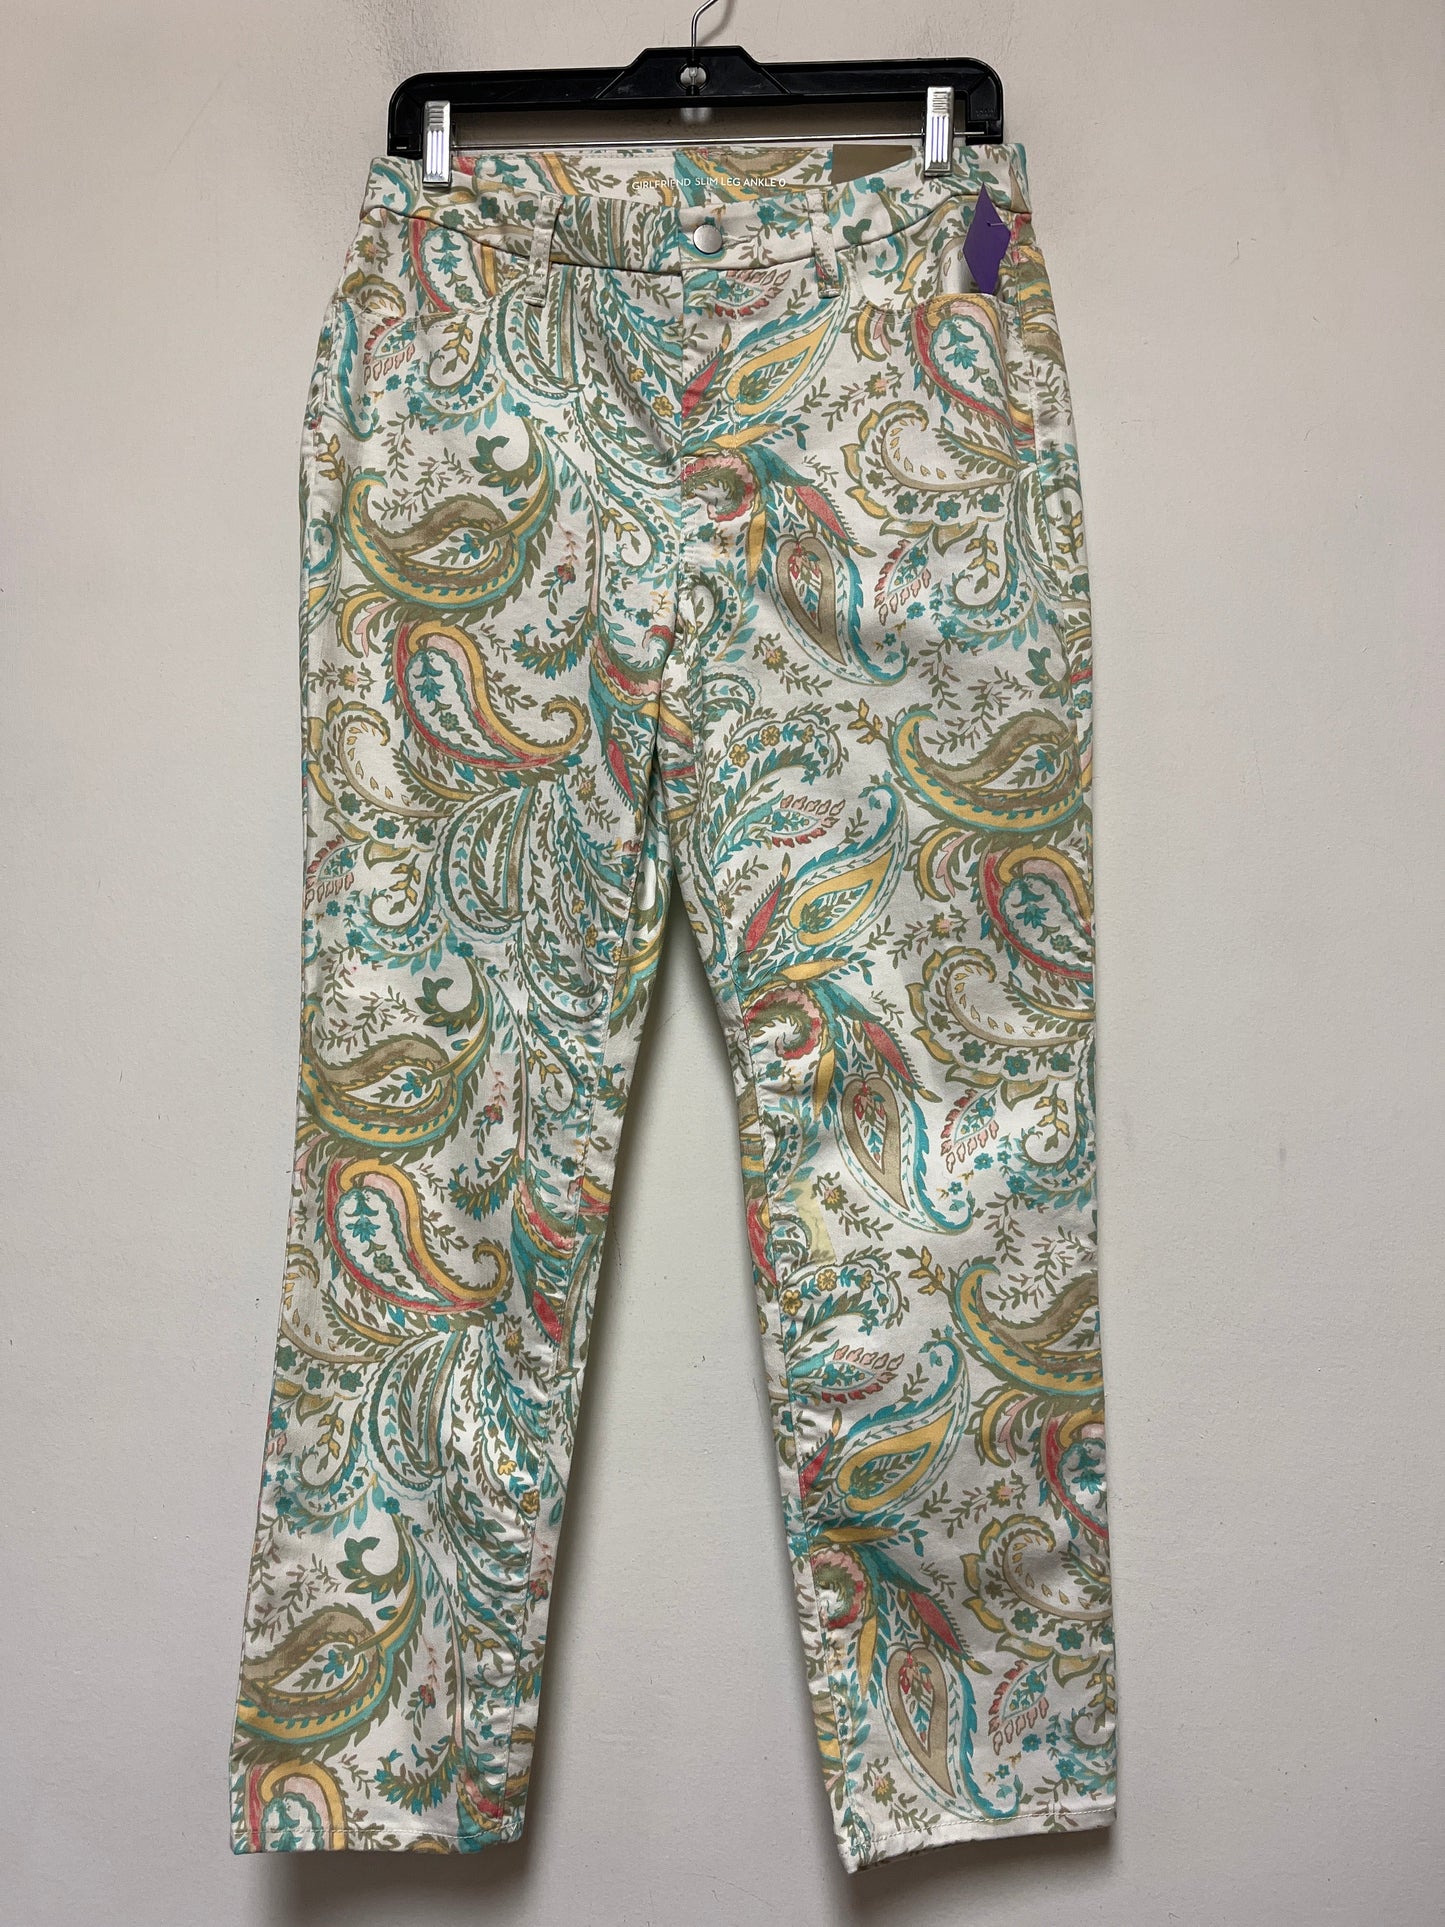 Floral Print Jeans Straight Chicos, Size 0